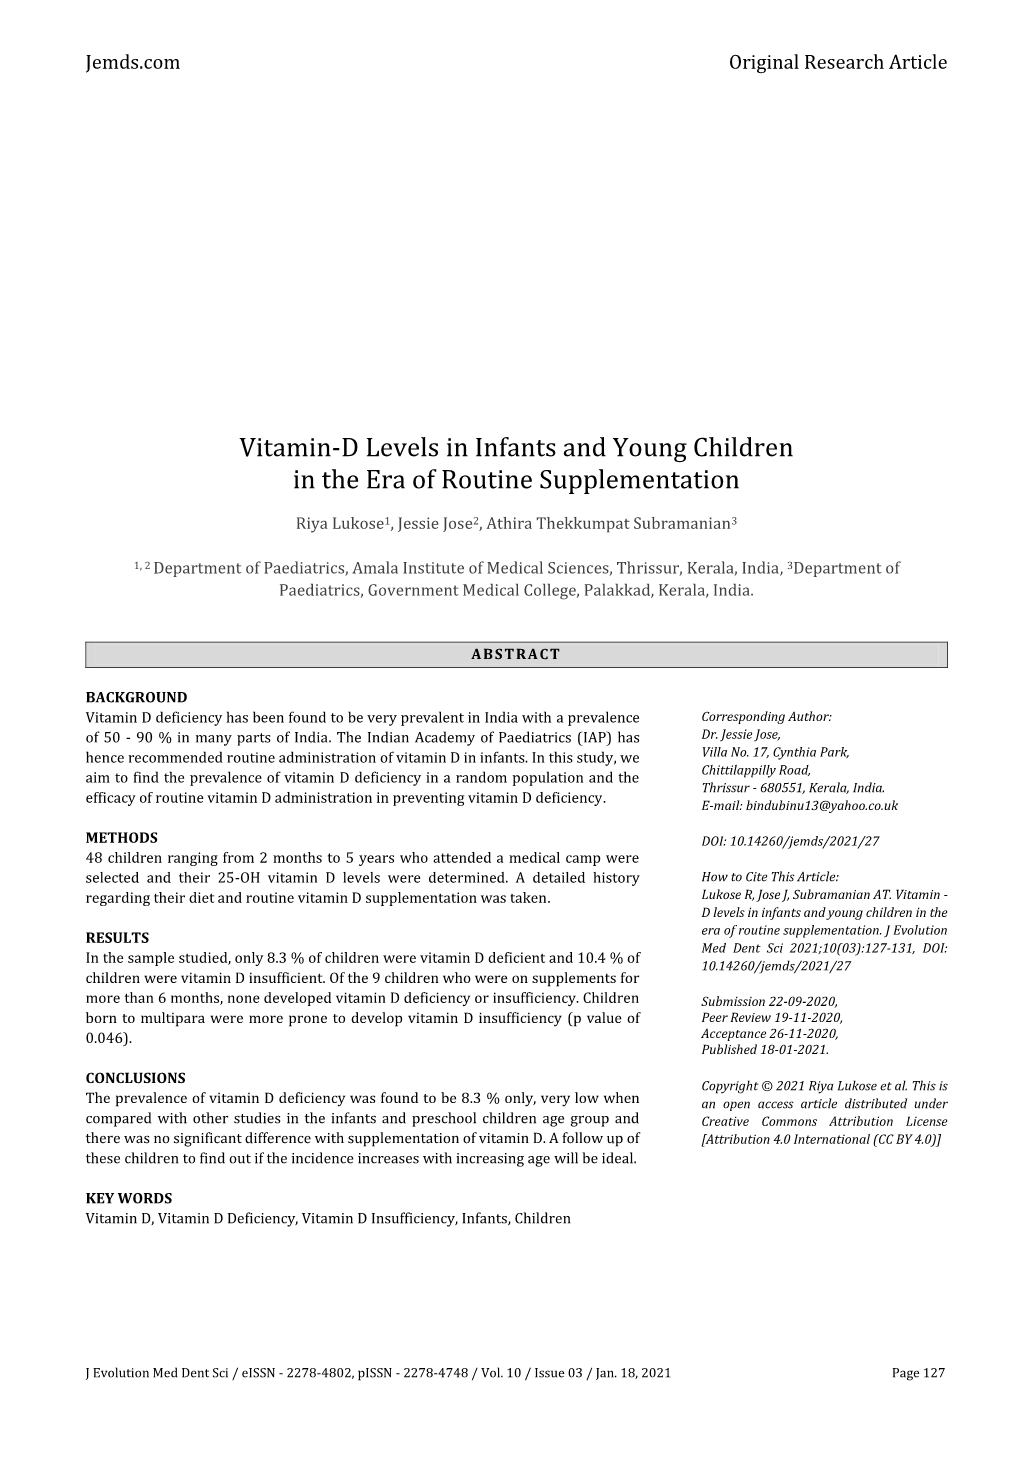 Vitamin-D Levels in Infants and Young Children in the Era of Routine Supplementation